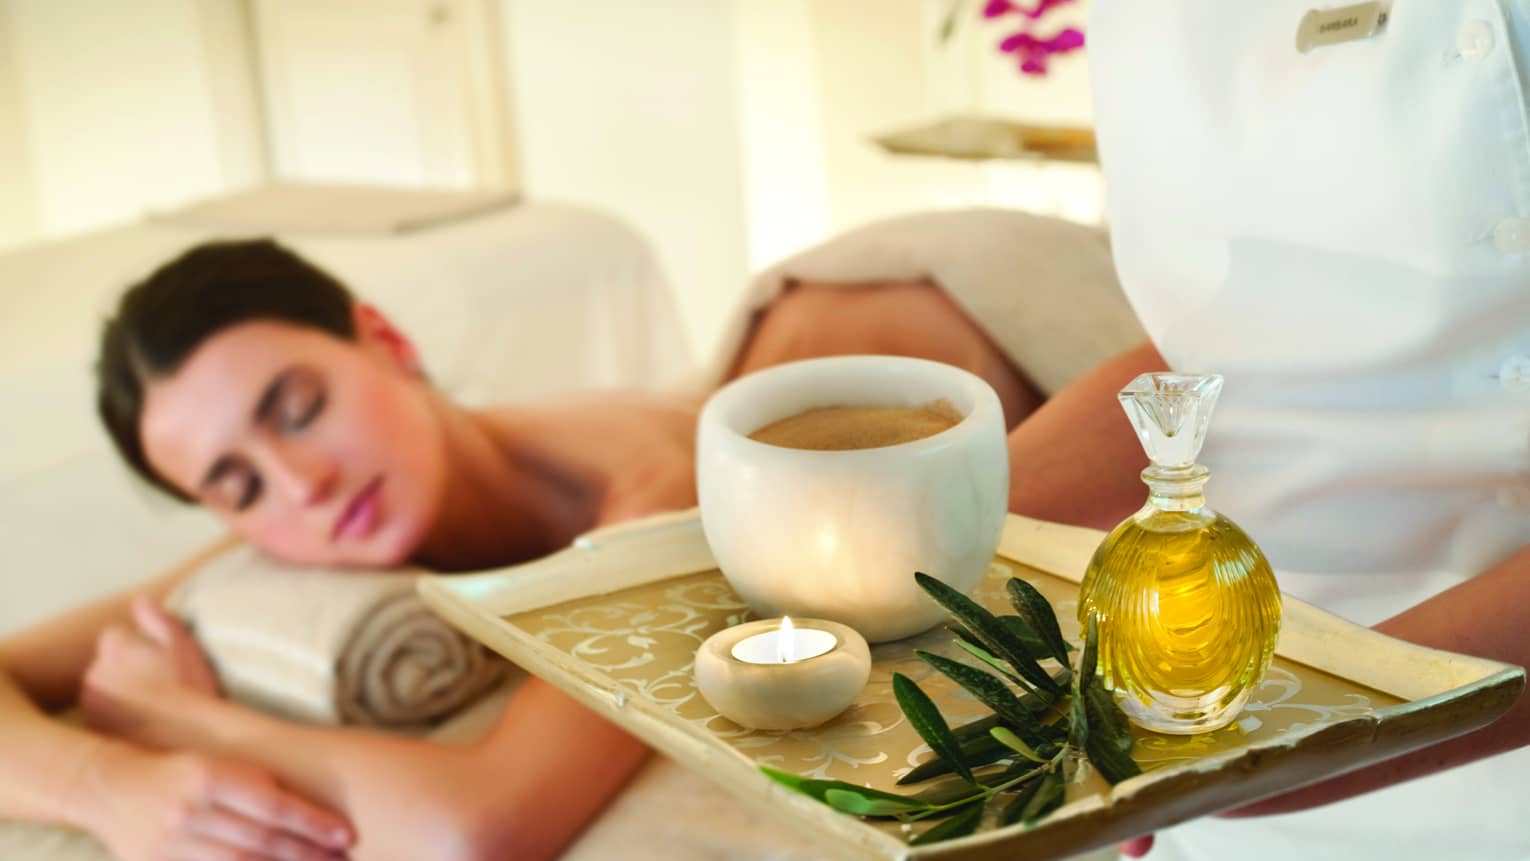 Spa staff holds tray with tealight candle, perfume, marble bowl near woman lying on massage table